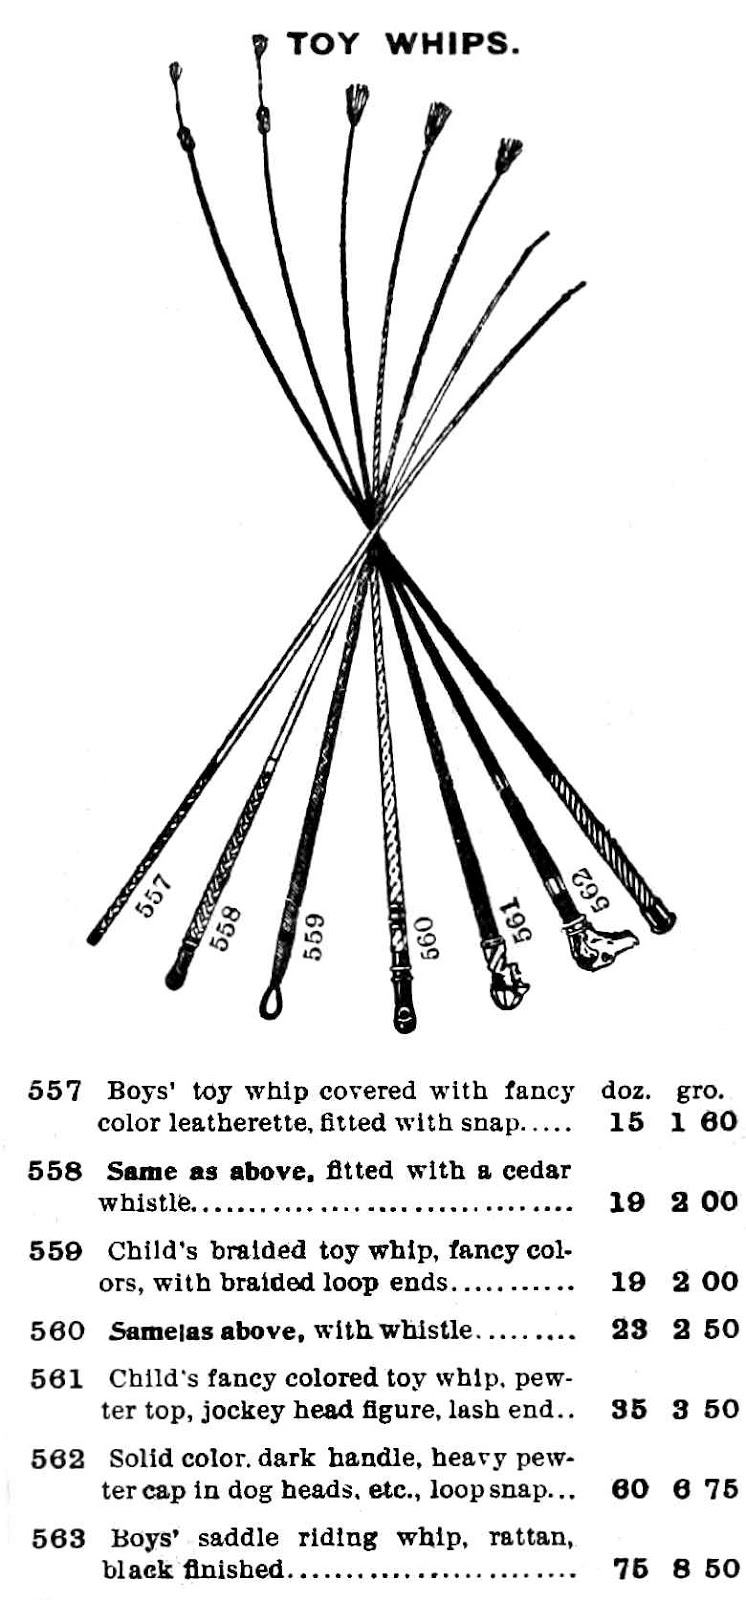 1903 toy whips for children with descriptions